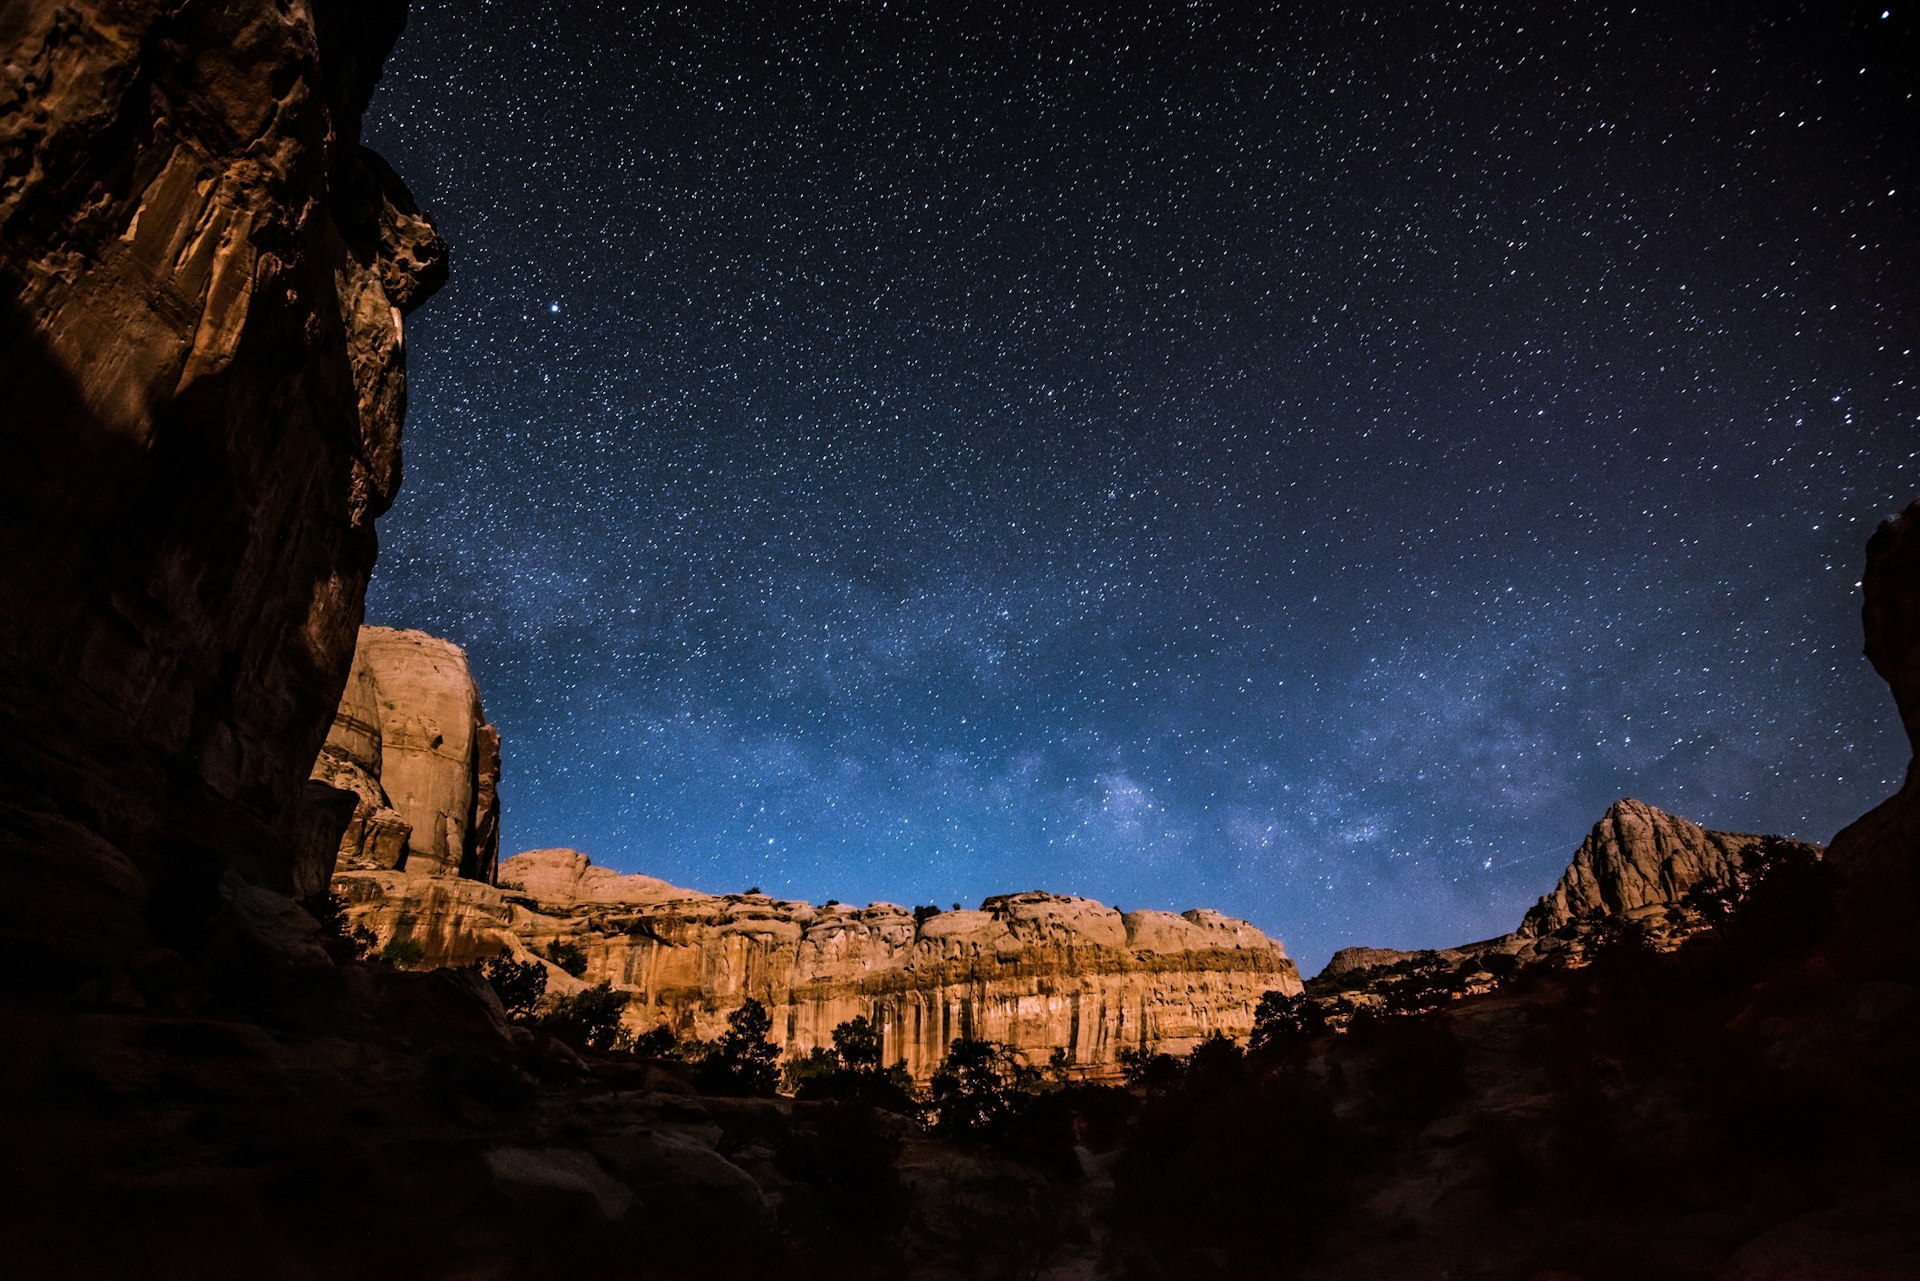 Starry sky over butte in Capitol Reef National Park, Torrey, Utah, USA